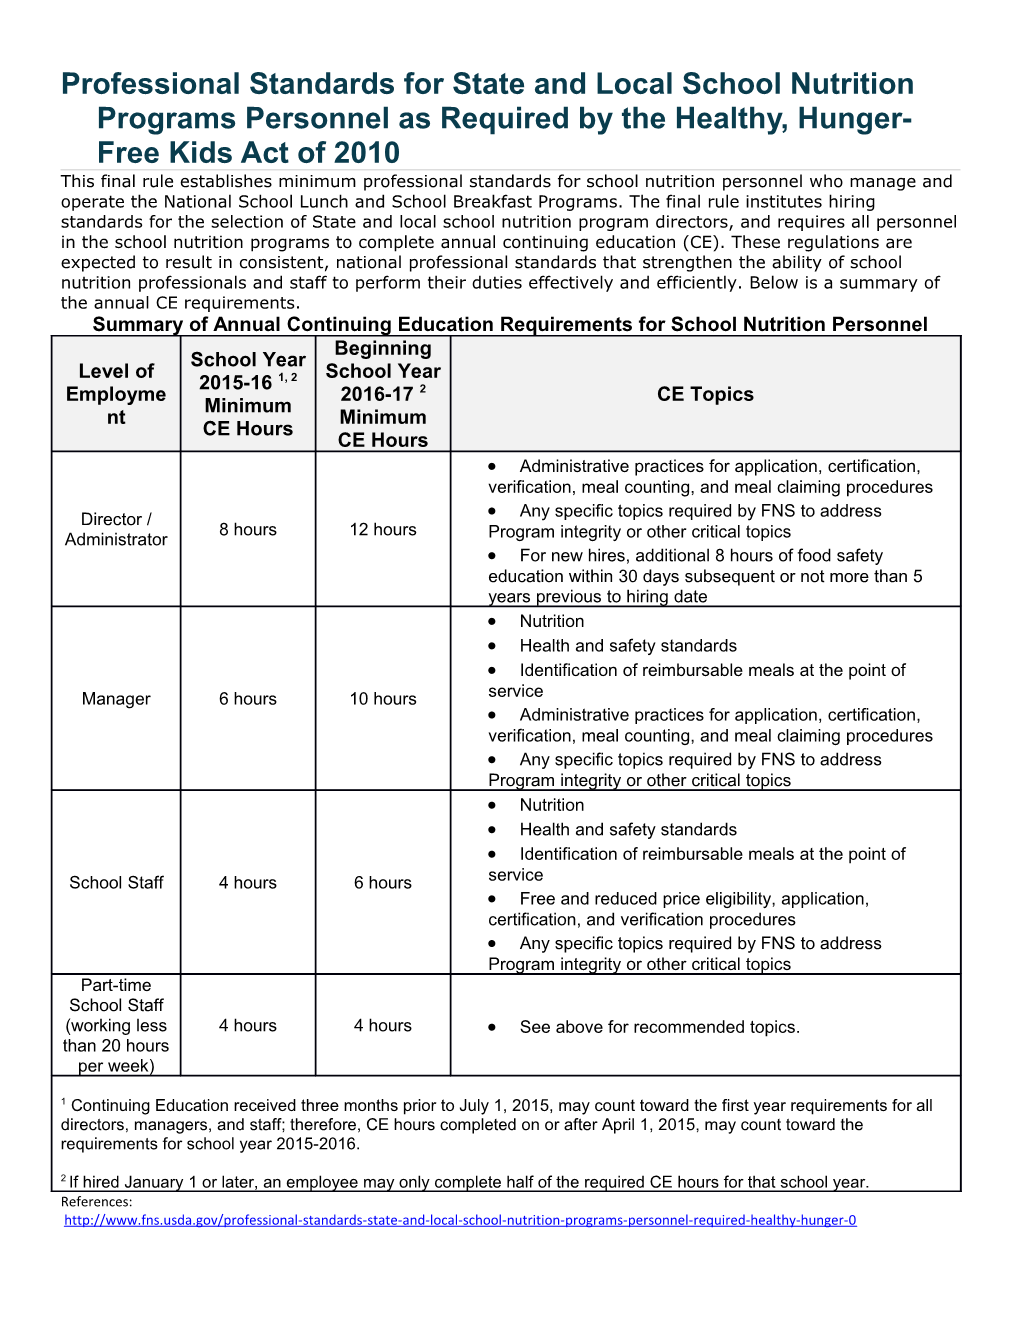 Summary of Annual Continuing Education Requirements for School Nutrition Personnel